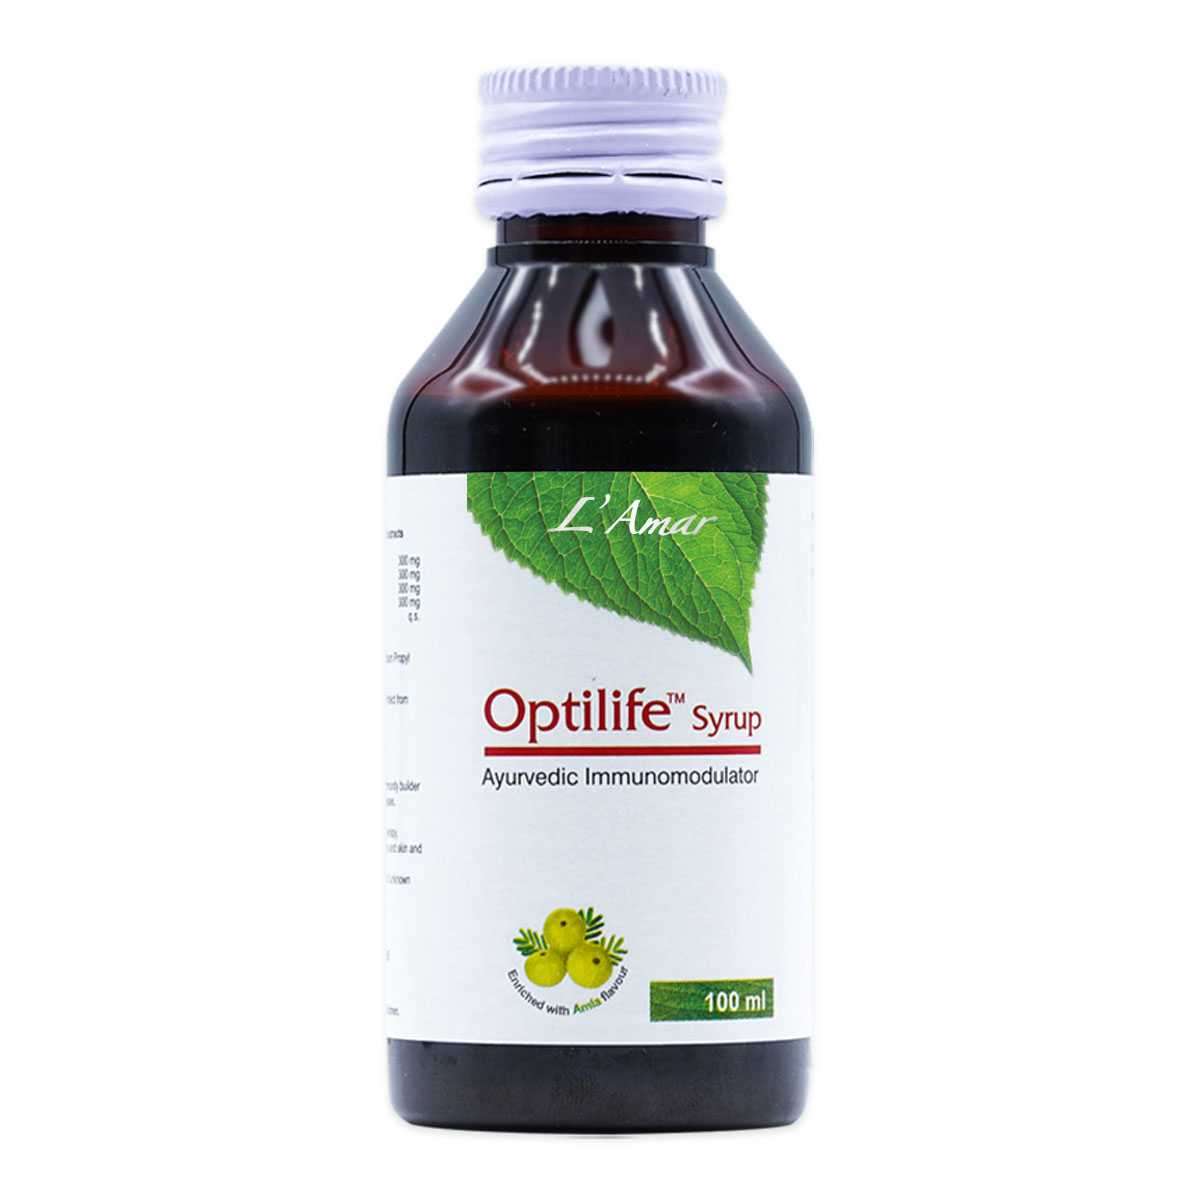 OPTILIFE SYRUP 100ML - immunity booster syrup